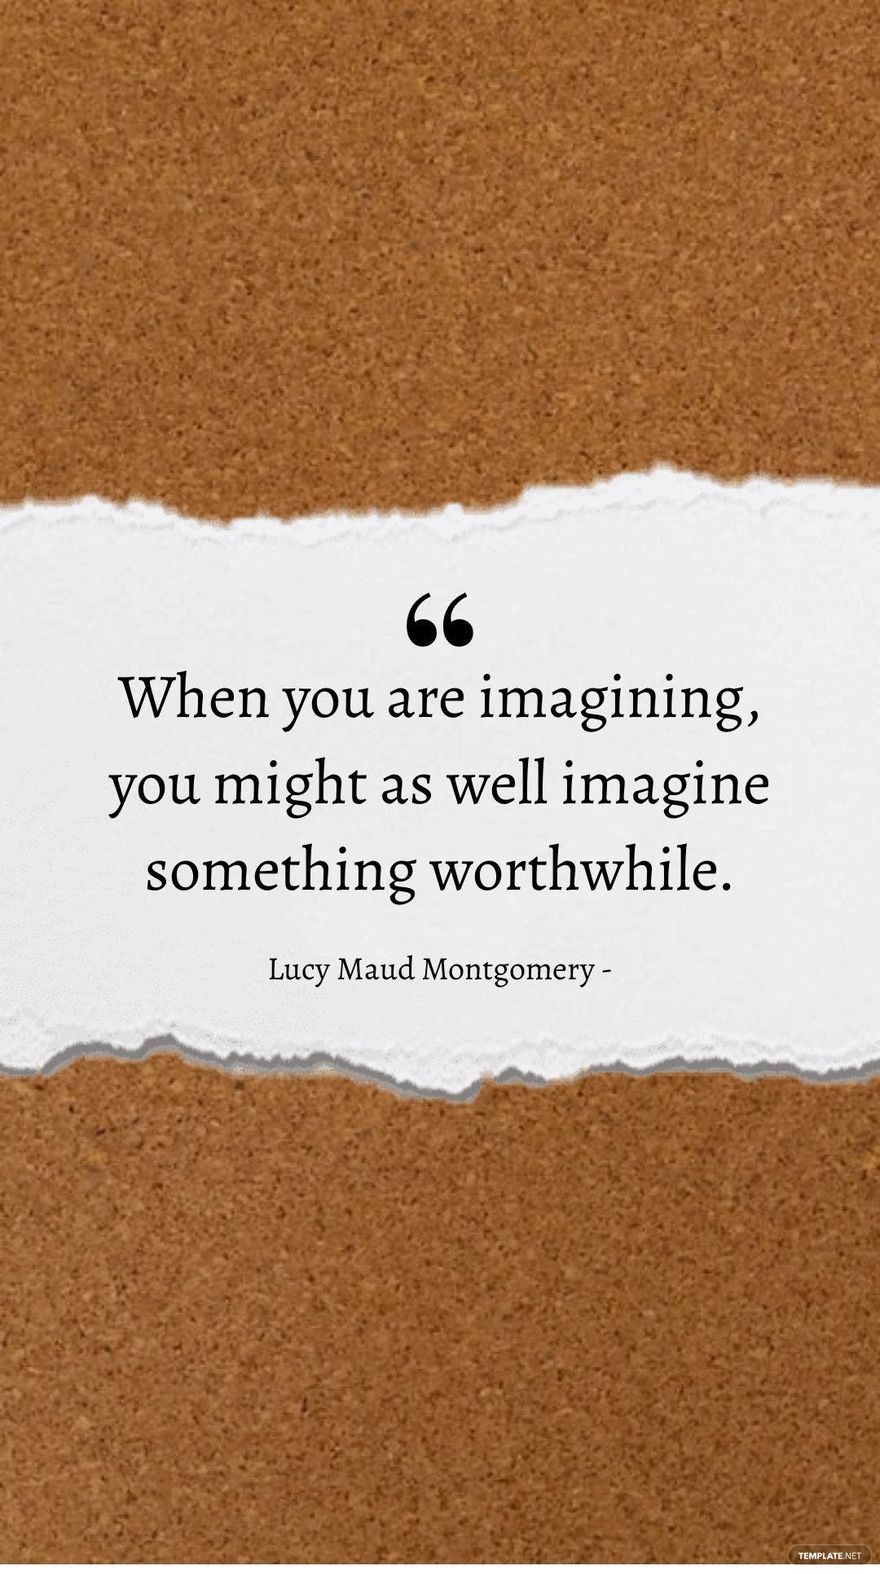 Lucy Maud Montgomery - When you are imagining, you might as well imagine something worthwhile.